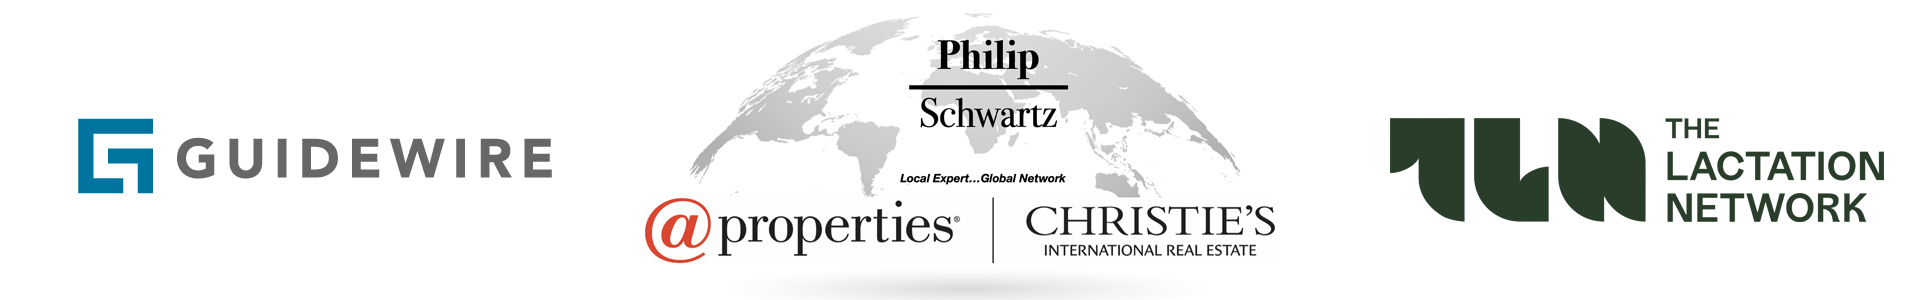 Sponsors logos for Guidewire, Philip Schwartz and the Lactation Network